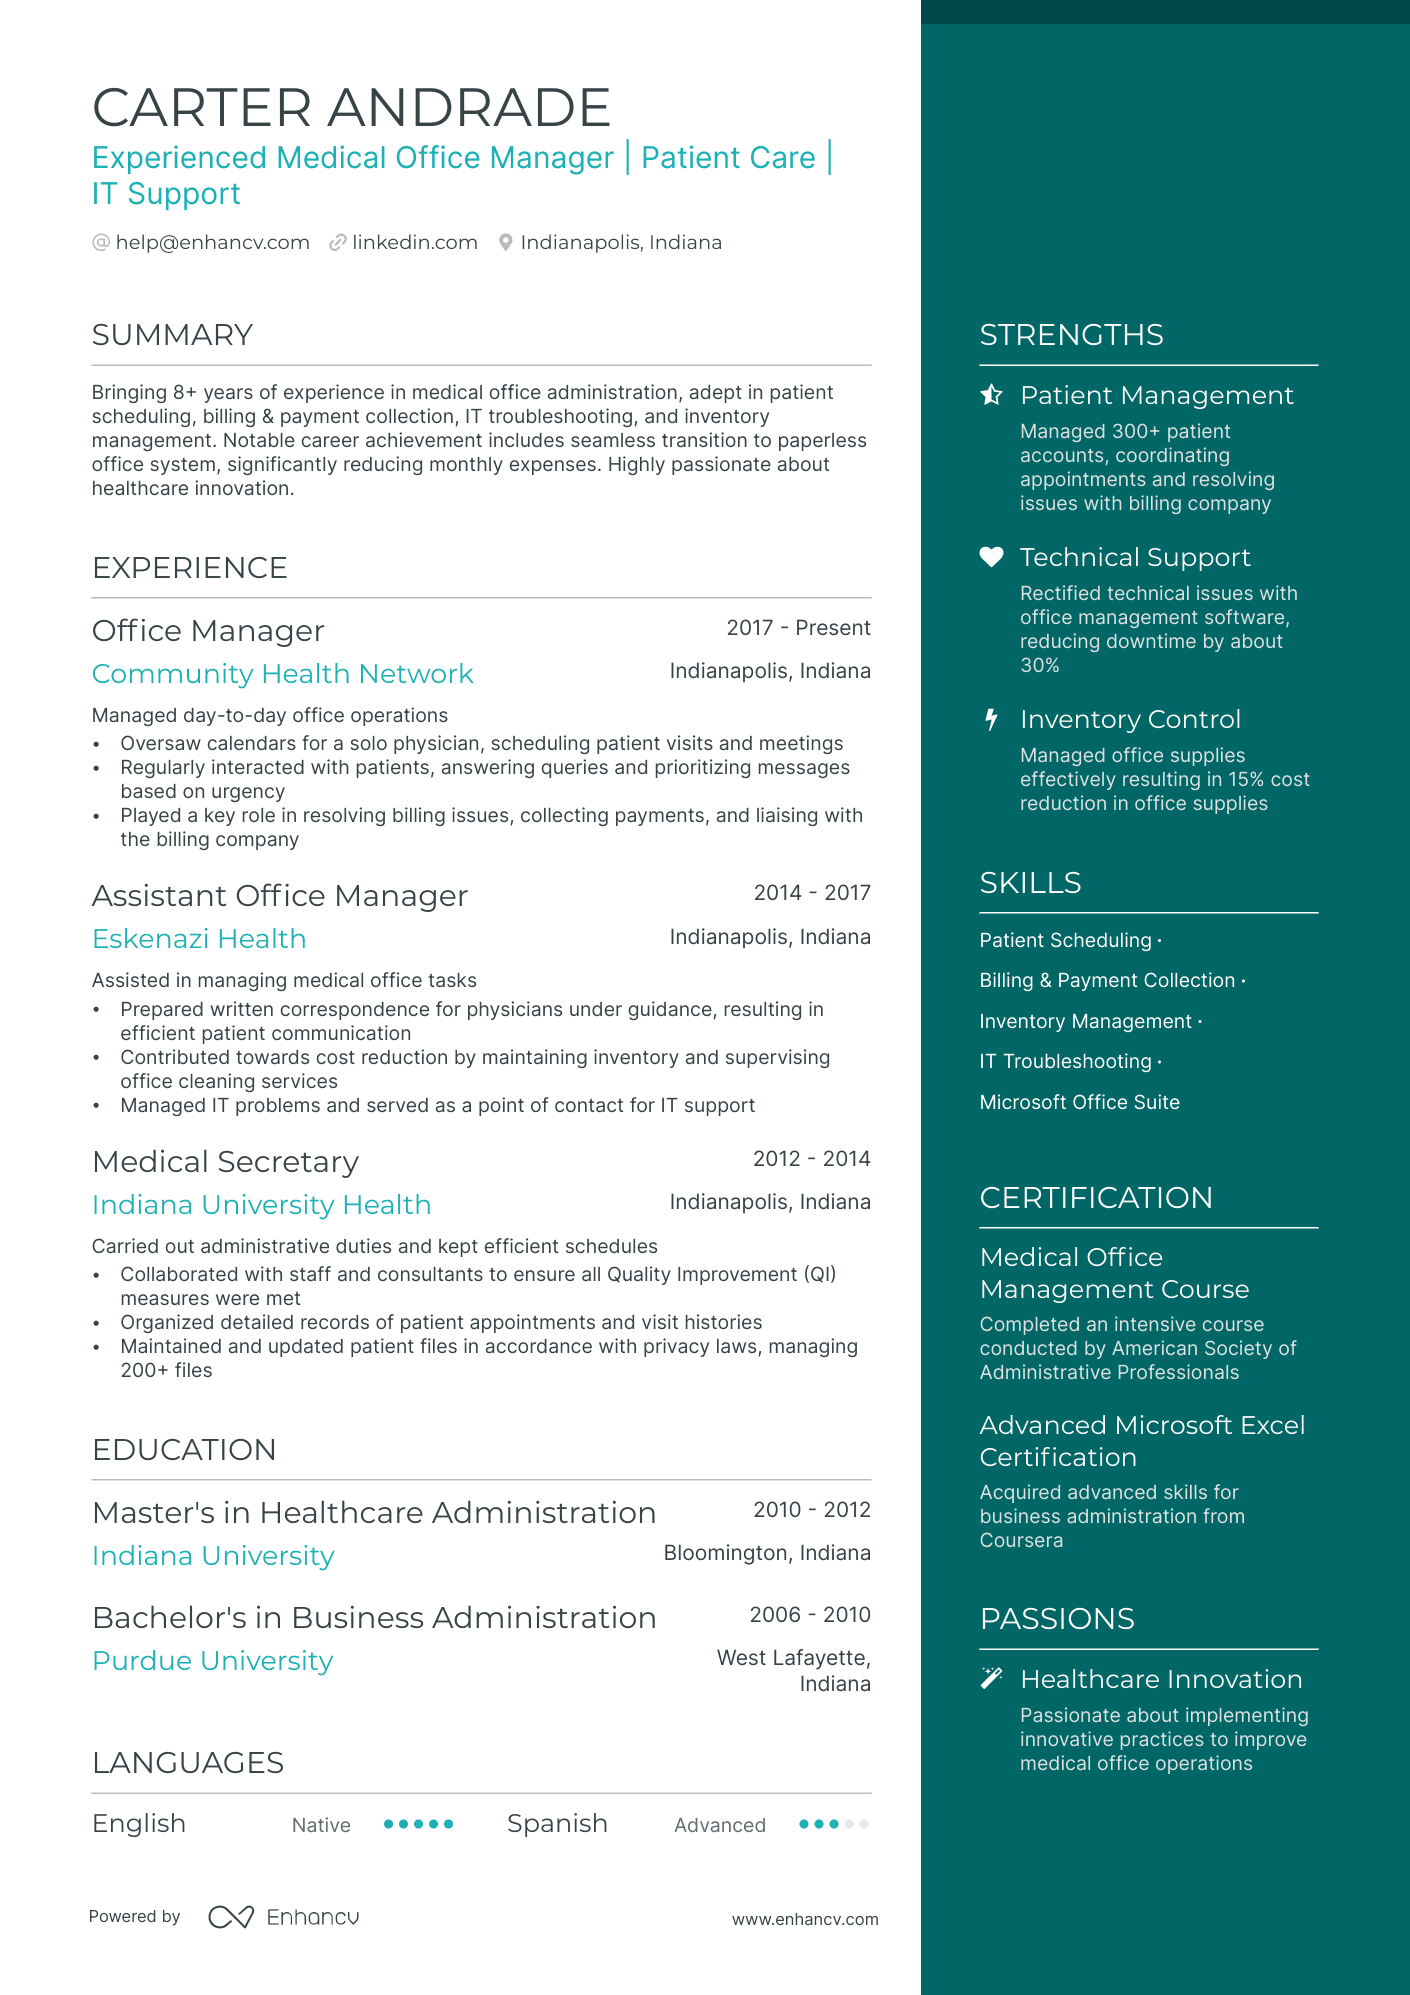 Medical Office Manager resume example